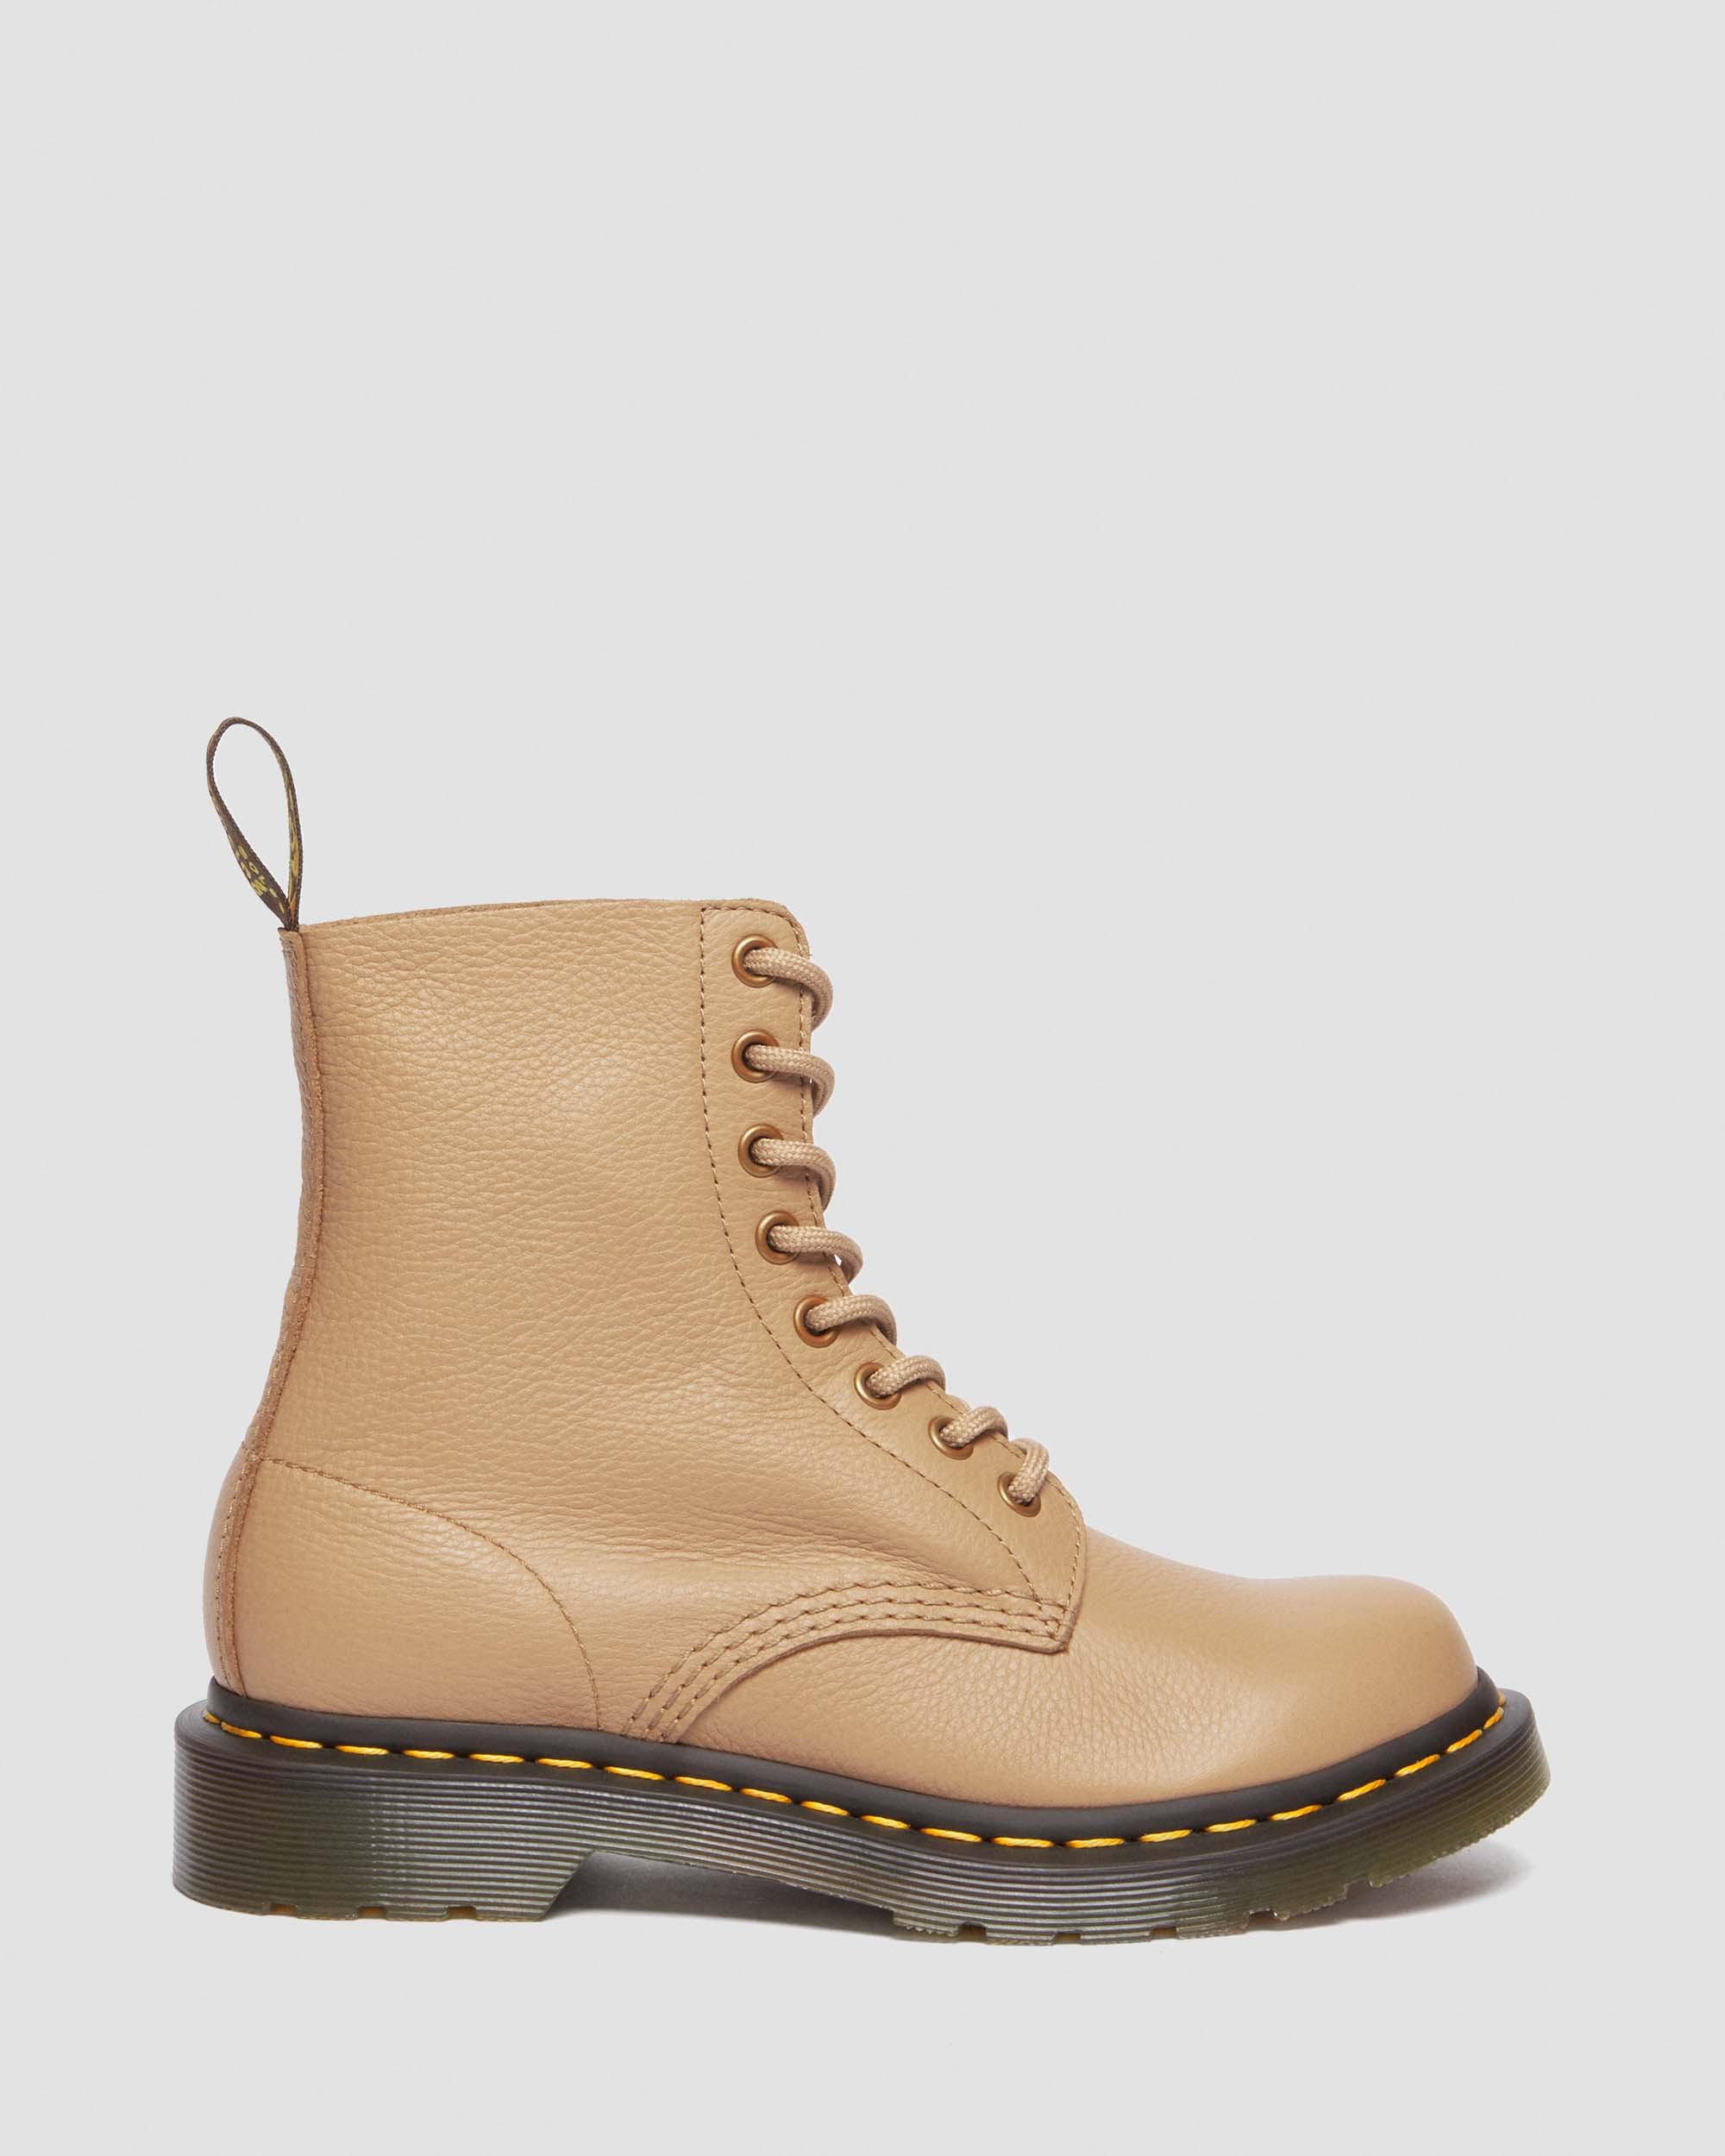 1460 Pascal Virginia Leather Lace Up Boots in Tan | Dr. Martens